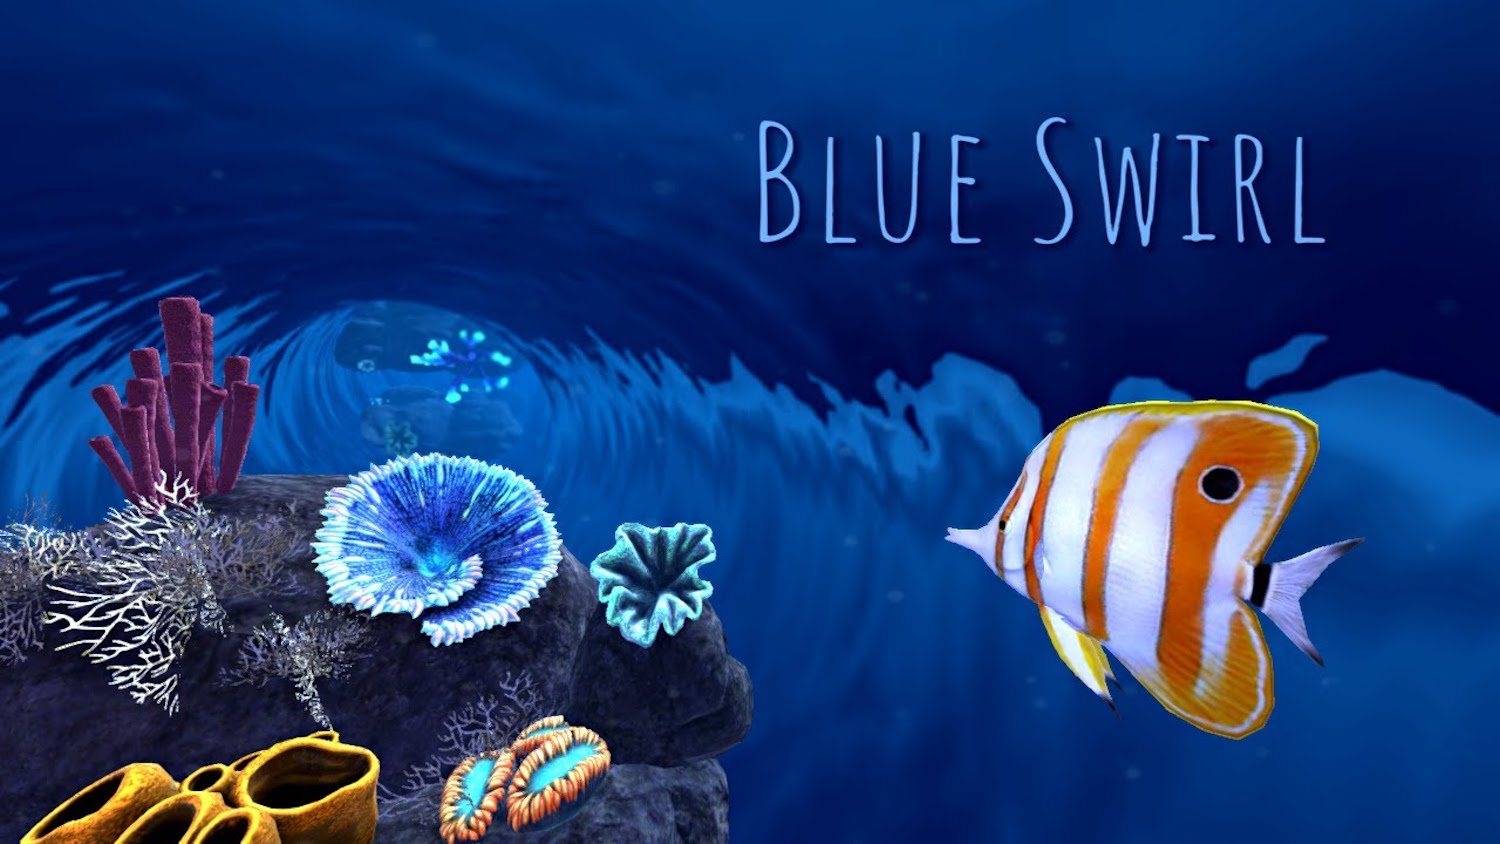 Blue+Swirl+is+a+unique+take+on+the+runner+genre+games.+Your+abilities+test+you+as+you+go+through+many+ocean+obstacles+and+the+deeper+you+go+the+harder+it%E2%80%99ll+get+for+you+to+pass+the+level.+You%E2%80%99ll+have+constant+surprises+throughout+this+generated+underwater+world++Rating%3A+A+%0APhoto+Courtesy+of+Rikzu+Games+